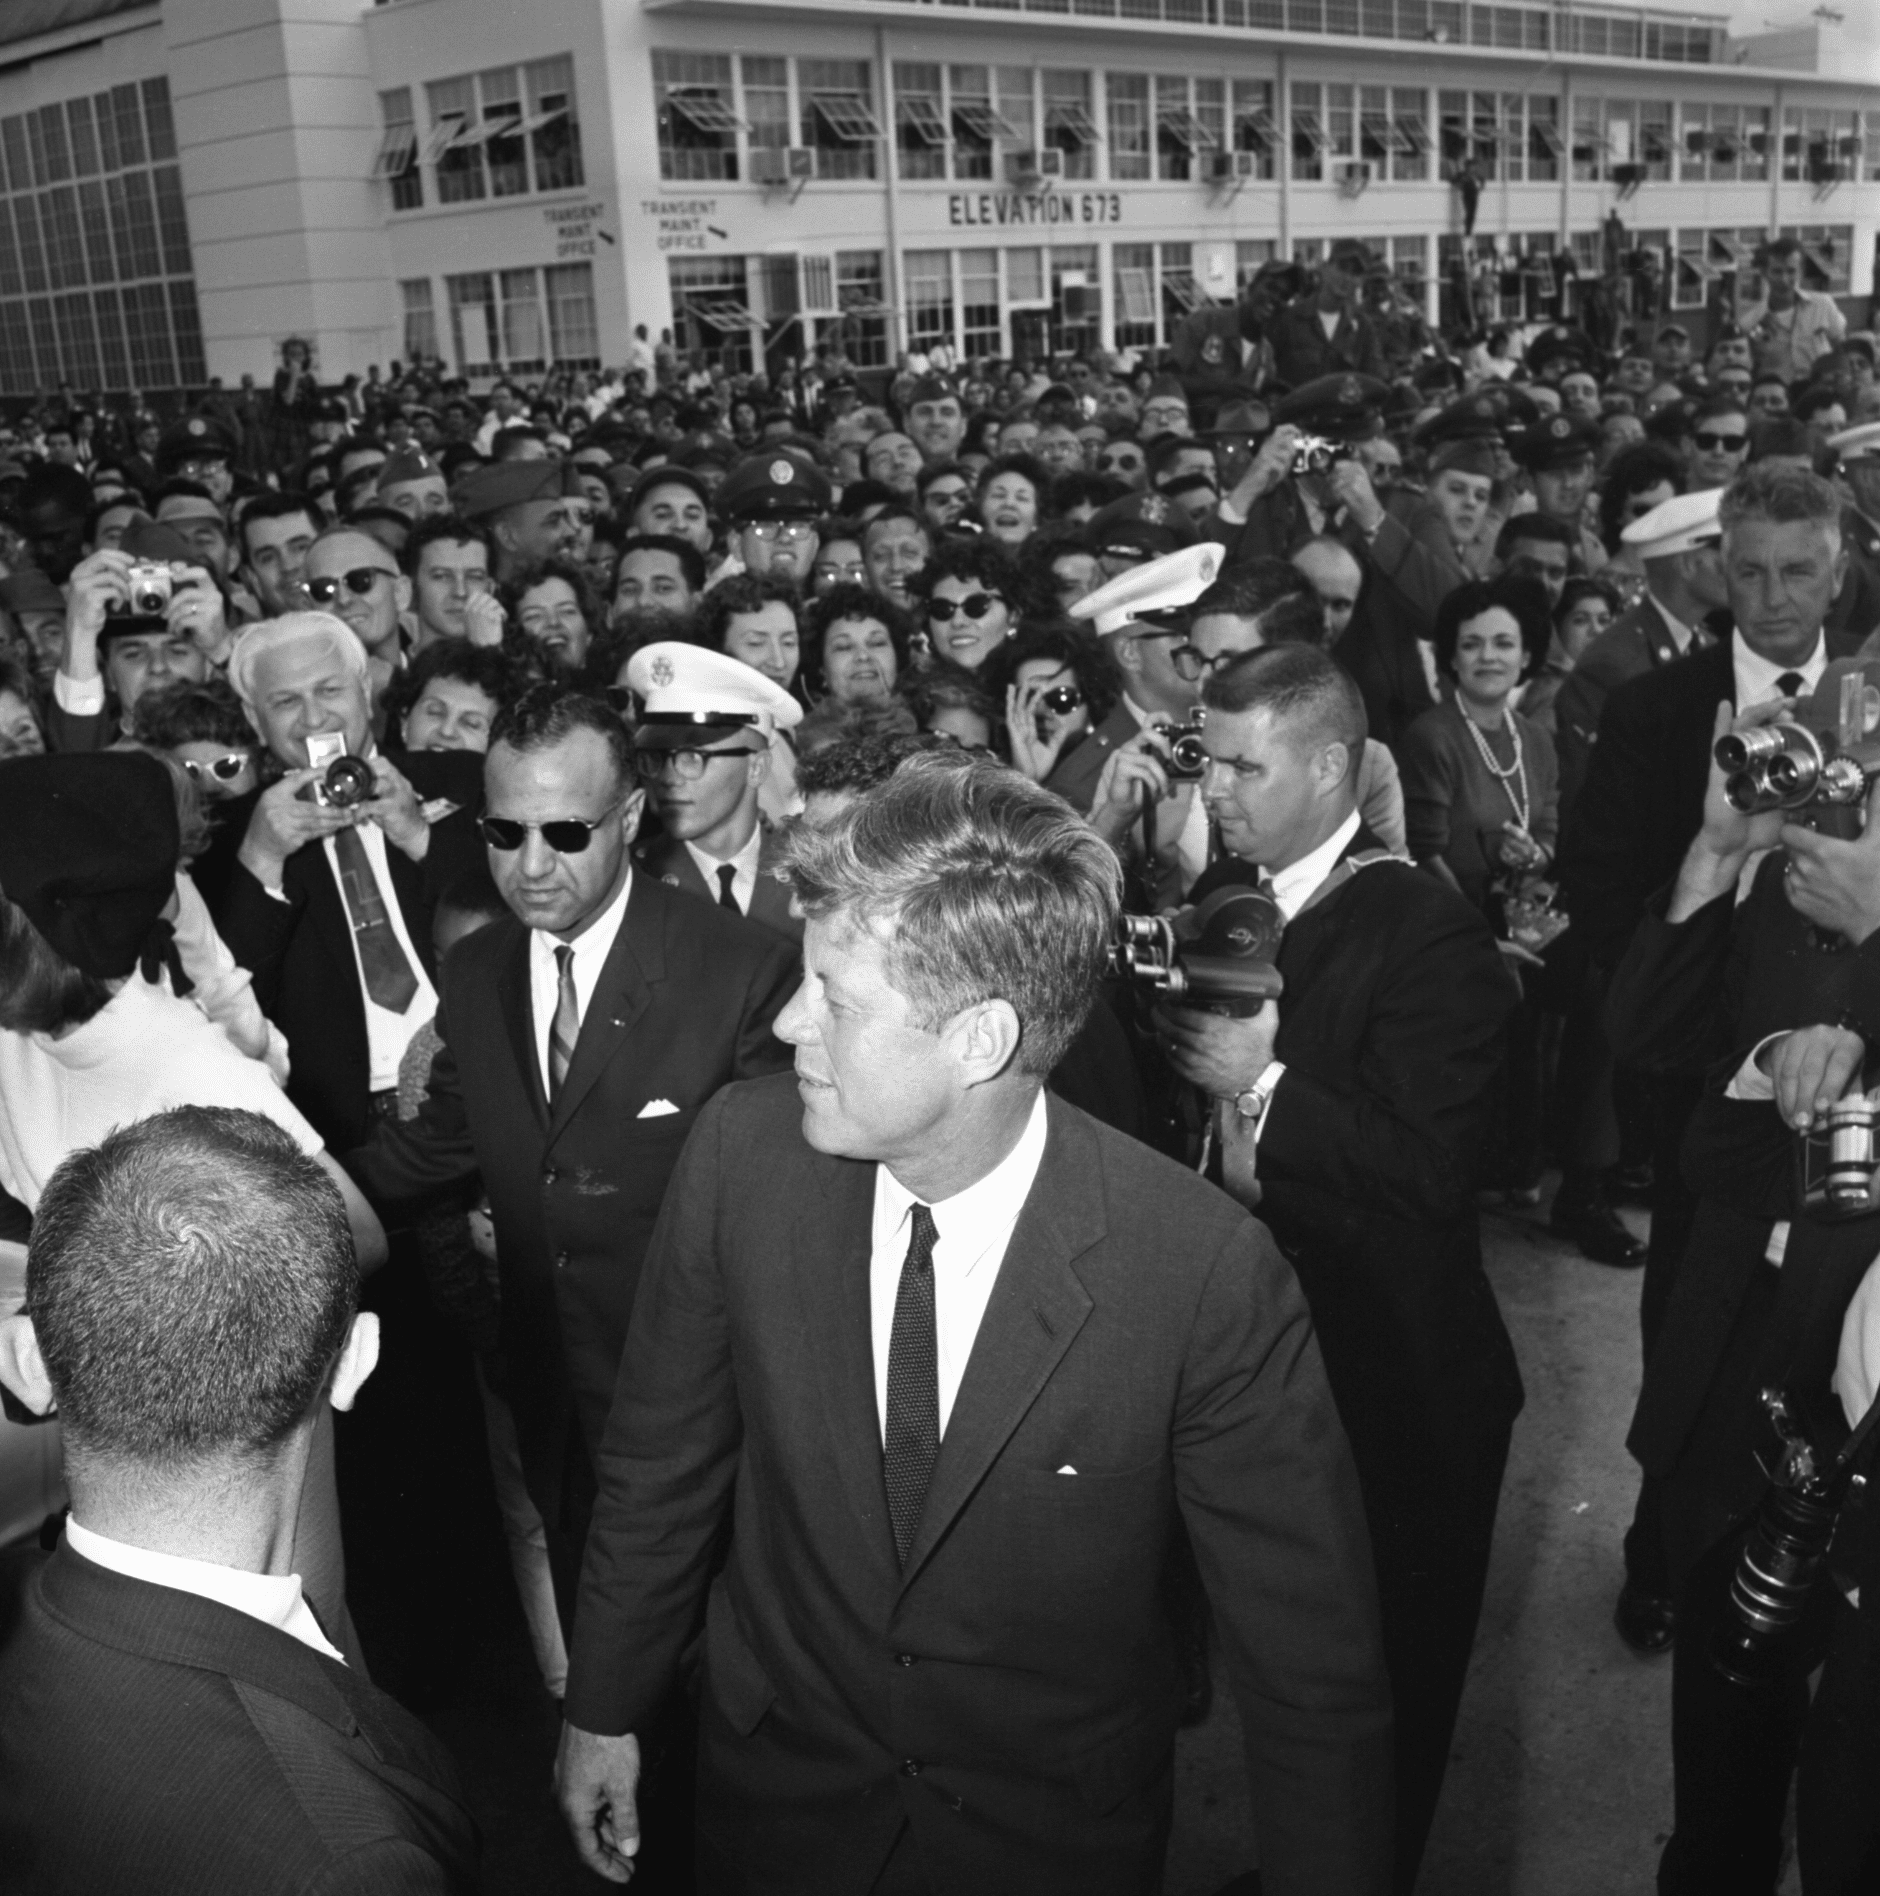 President and Mrs. Kennedy are surrounded by enthusiastic well-wishers before their departure from San Antonio at Kelly Air Force Base.
Dallas Morning News Collection / The Sixth Floor Museum at Dealey Plaza. Donated in the interest of preserving history.